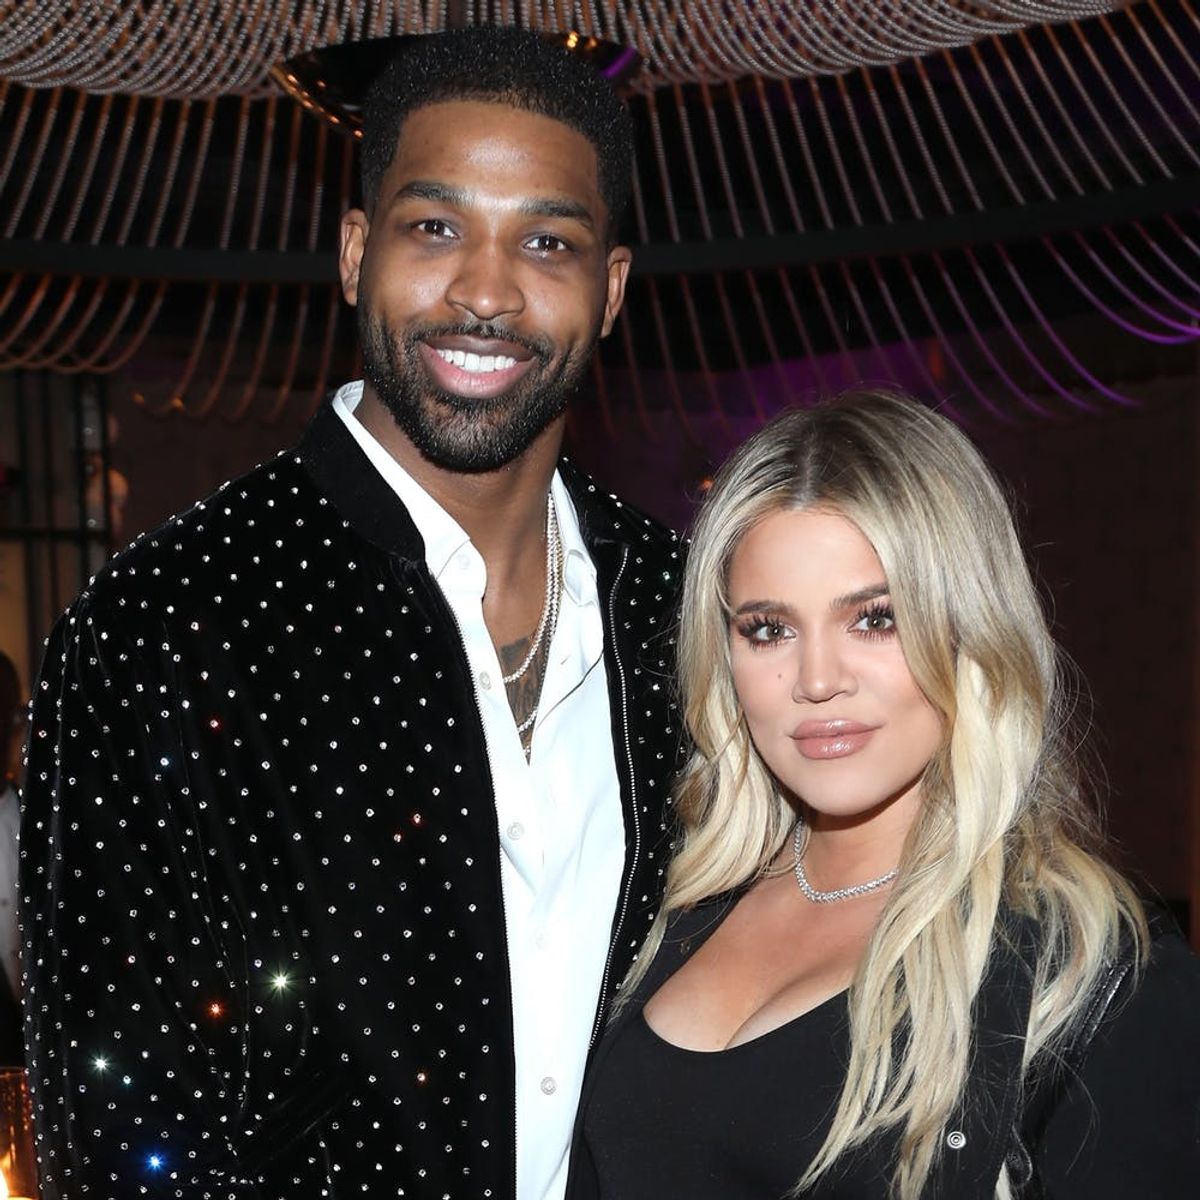 Khloé Kardashian Will Reveal the Sex of Her Baby on the ‘KUWTK’ Finale